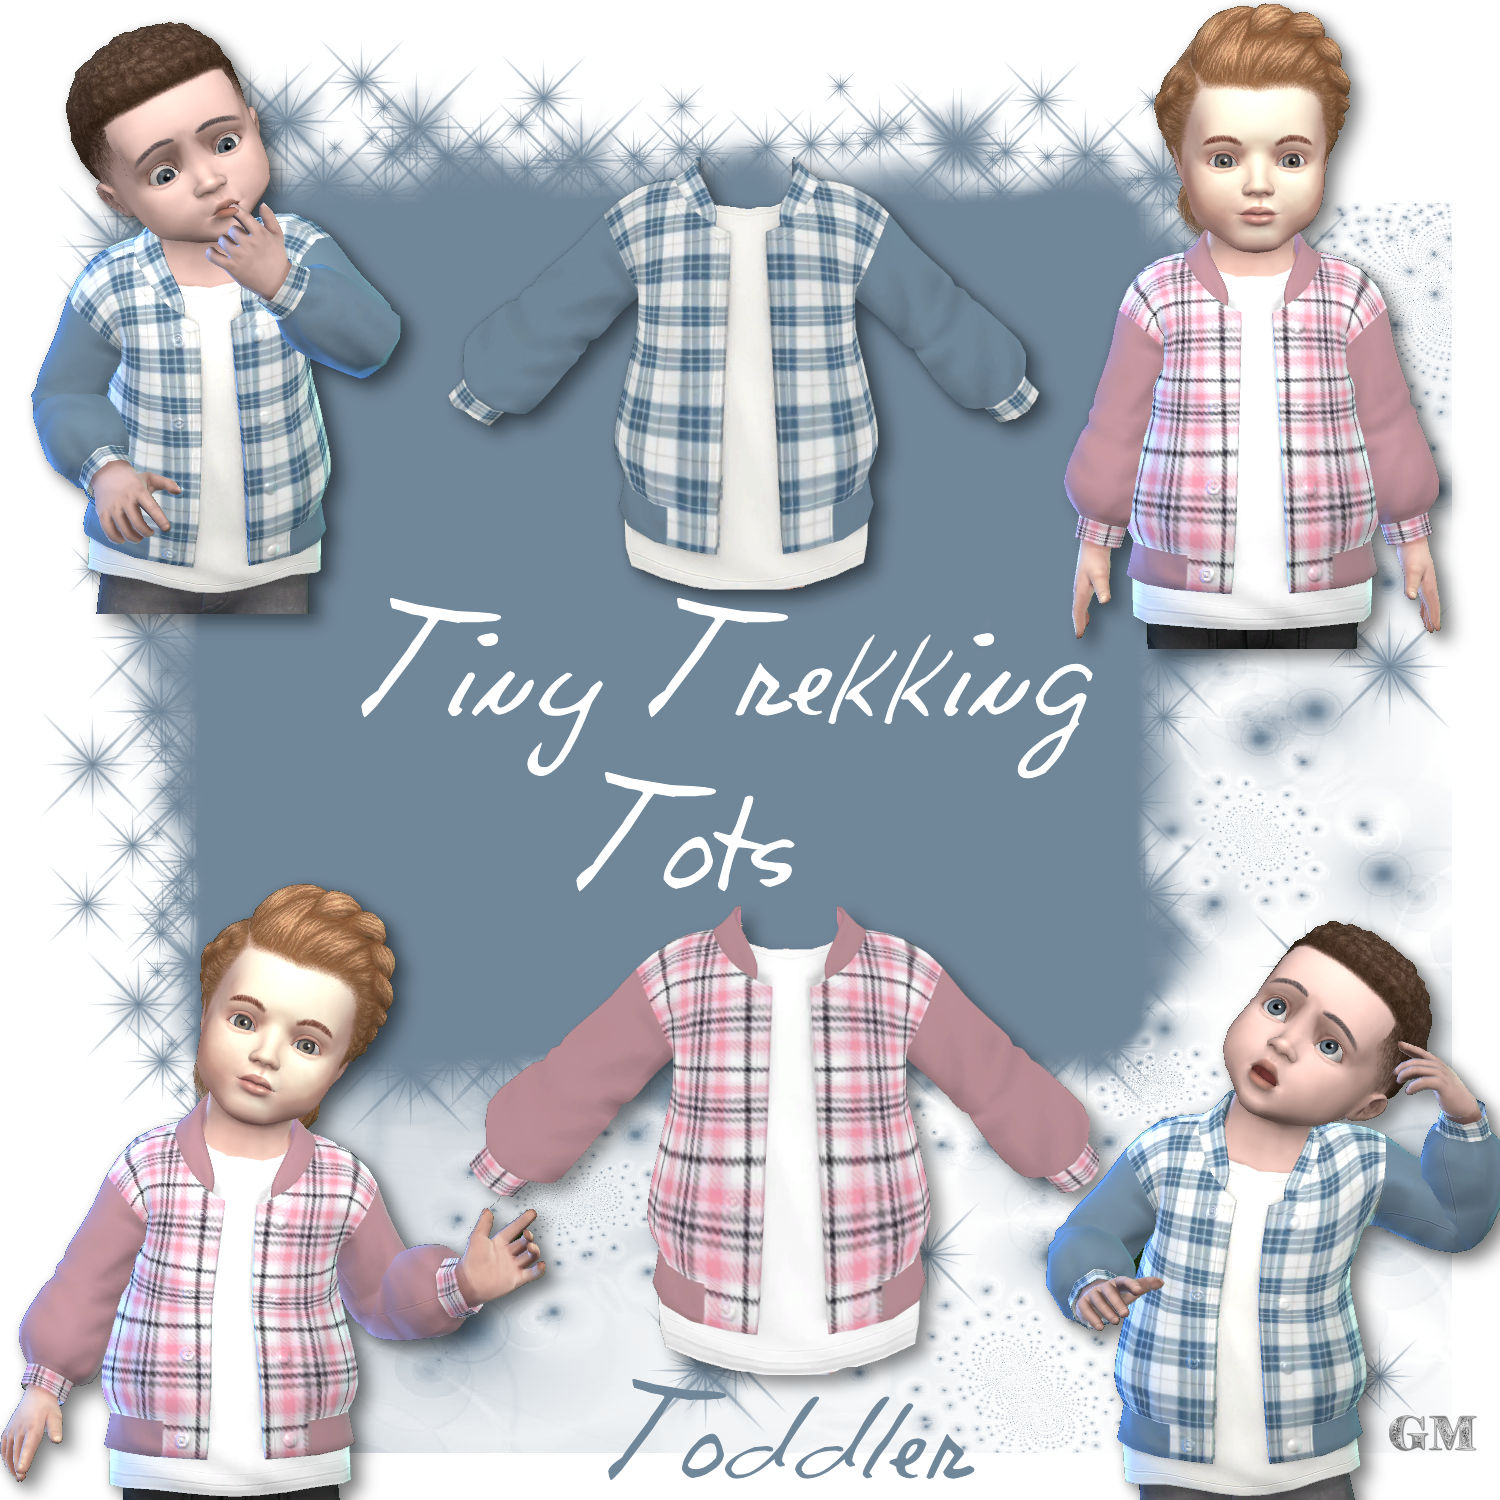 Download TinyTrekking Tots Toddler clothes - The Sims 4 Mods - CurseForge